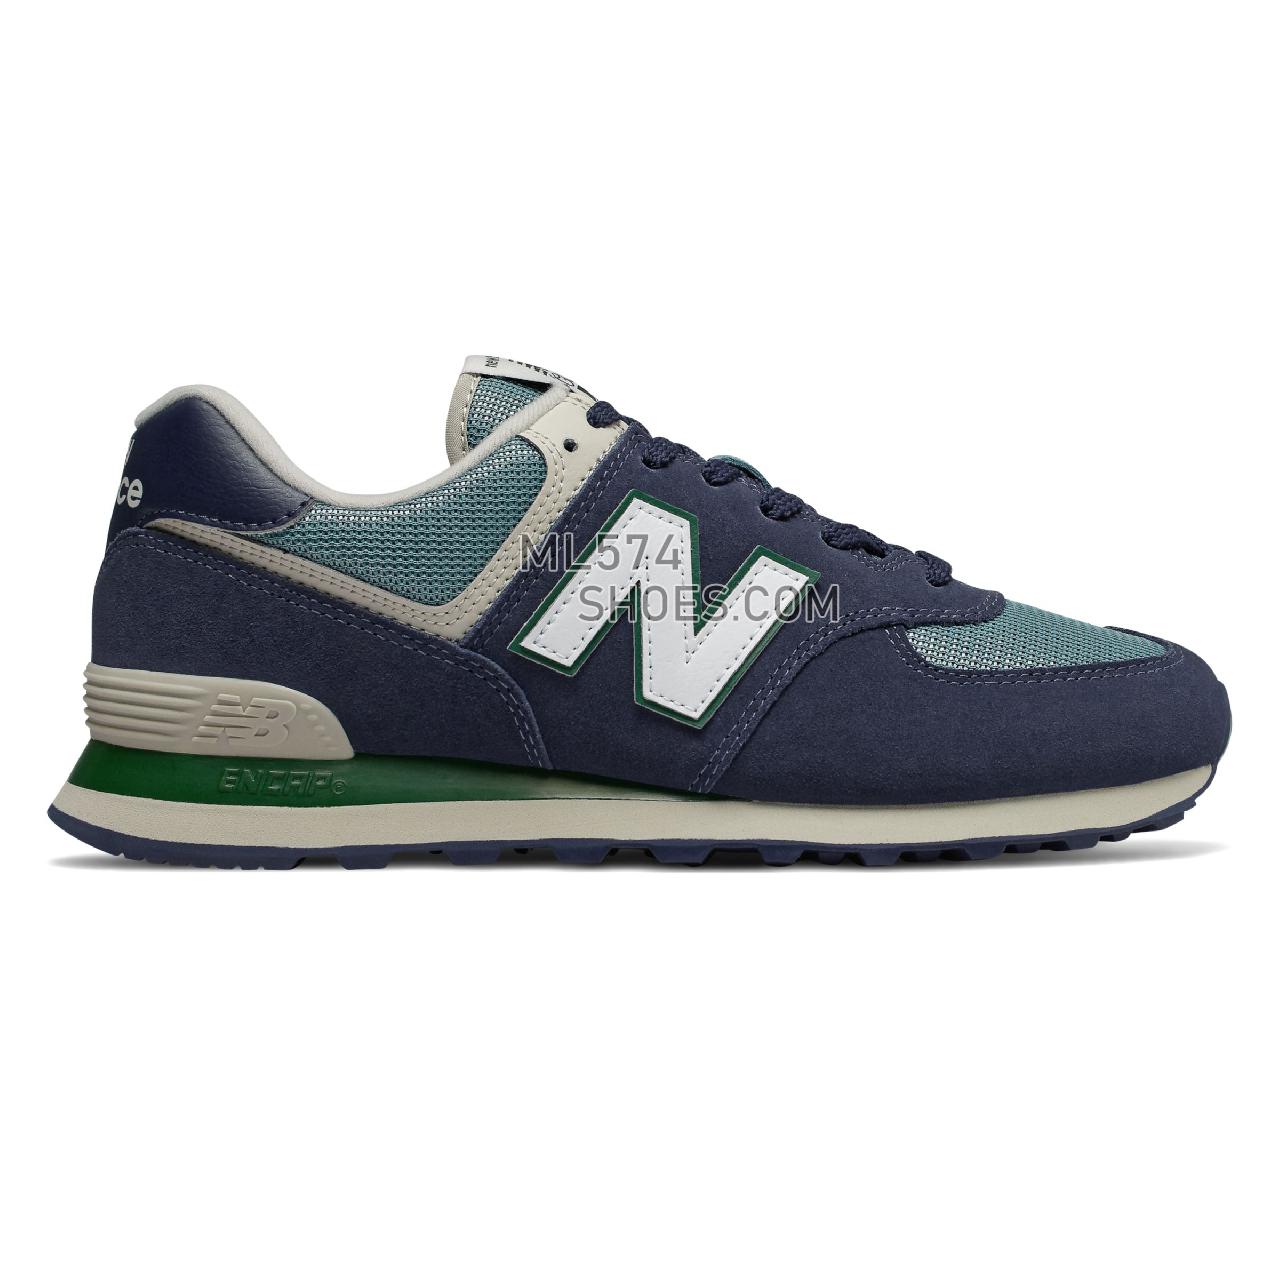 New Balance 574 - Men's Classic Sneakers - Pigment with Chambray - ML574ERK